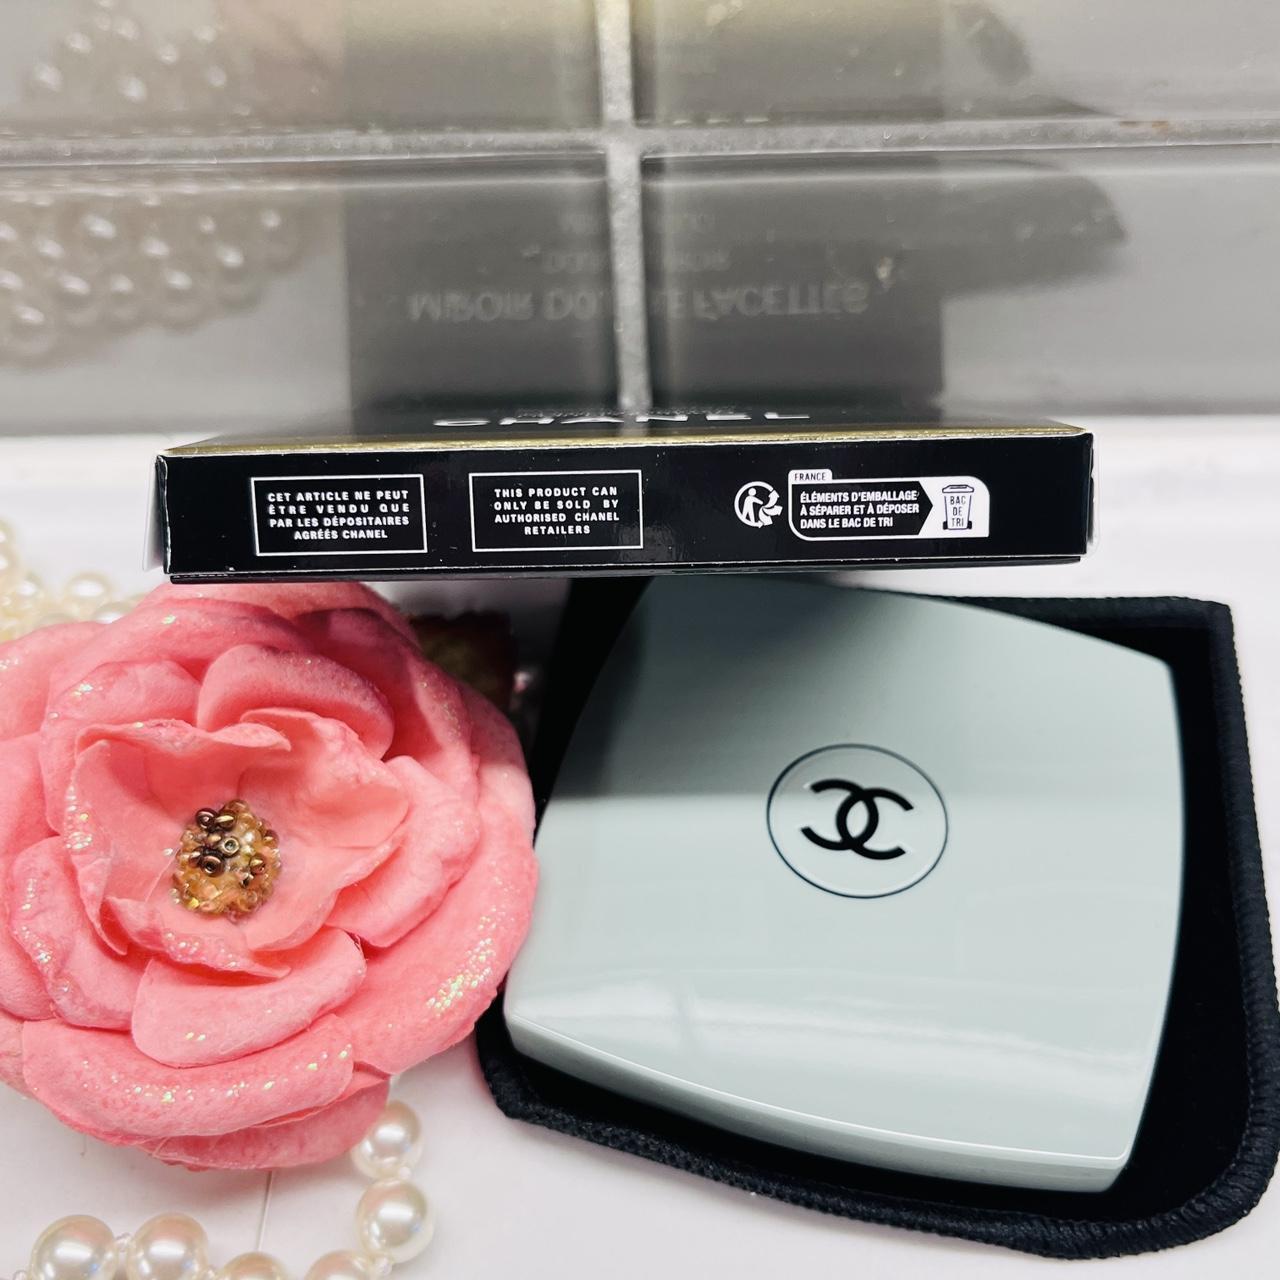 CHANEL Vip gift Beauty Makeup Mirror - Limited Edition - White